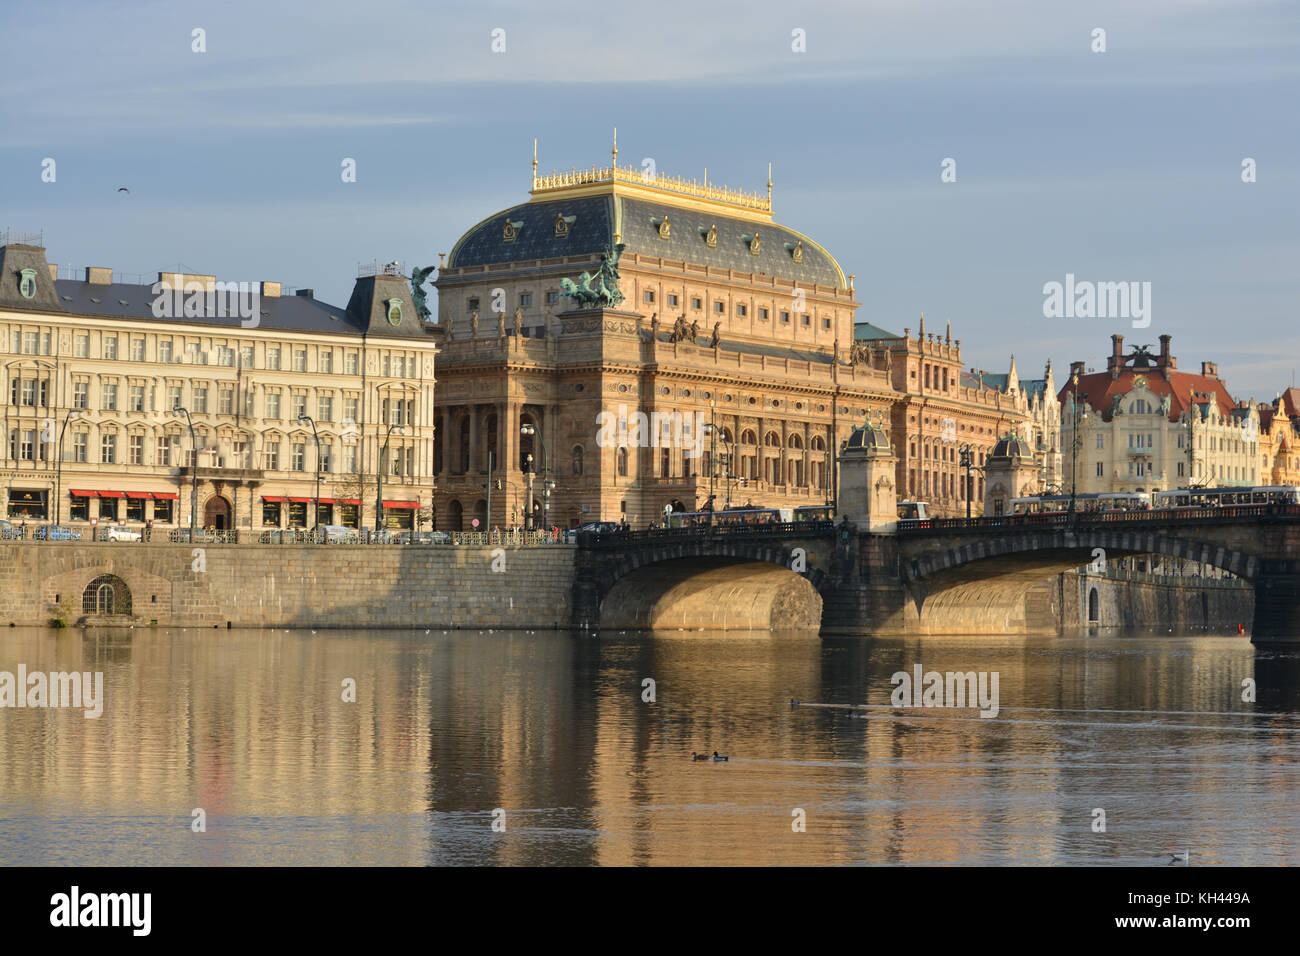 National Theater in Prague. The Vltava embankment in the capital of the Czech Republic. Stock Photo